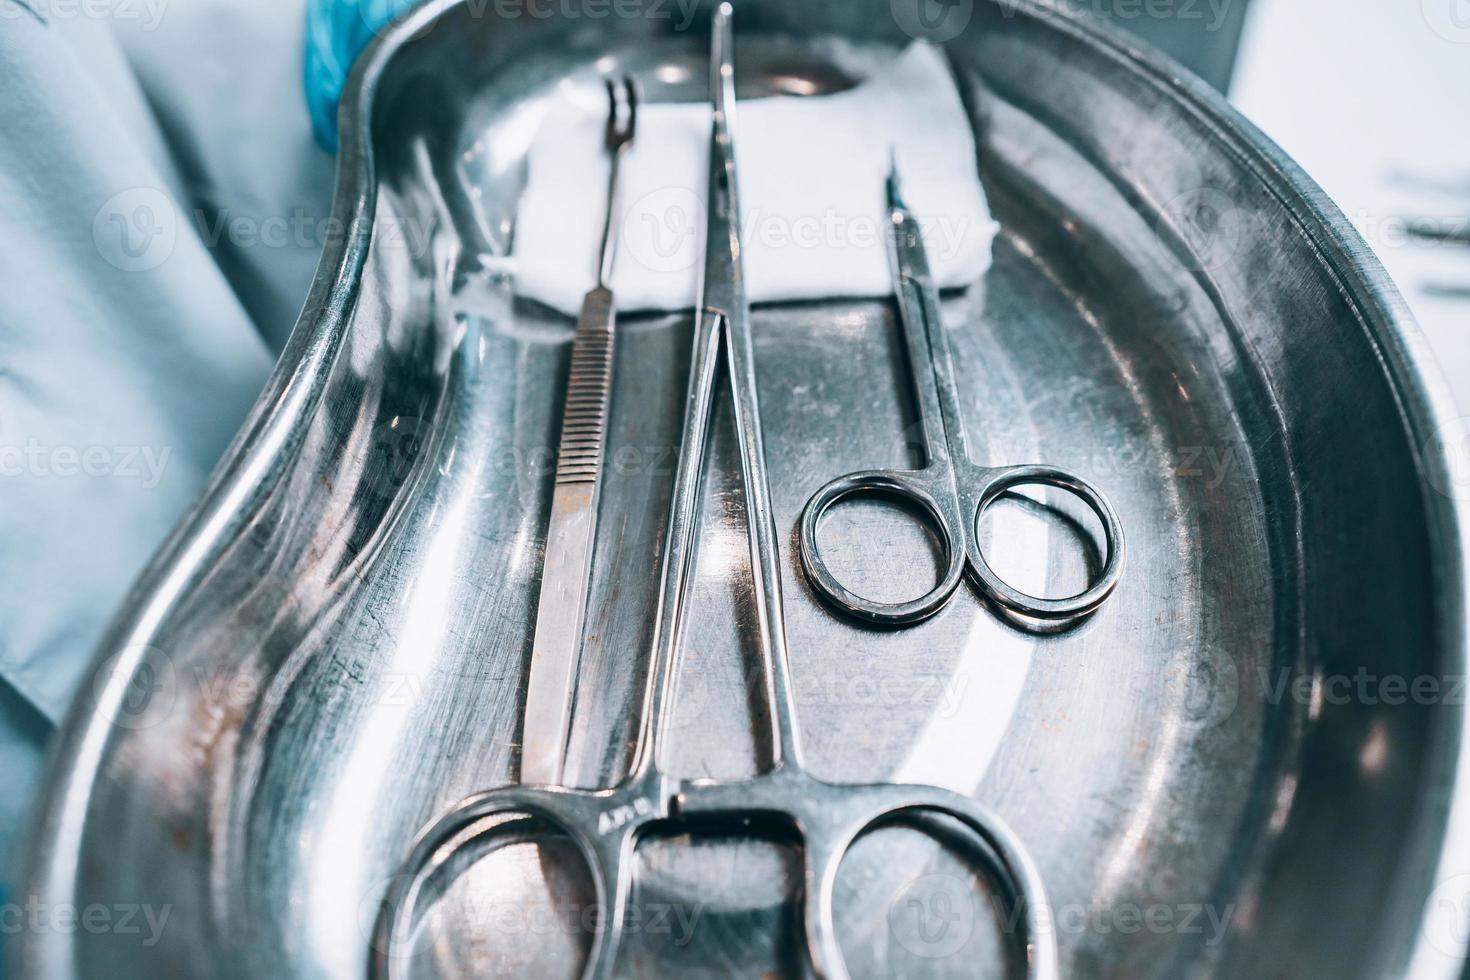 Several surgical instruments lie on a tray photo